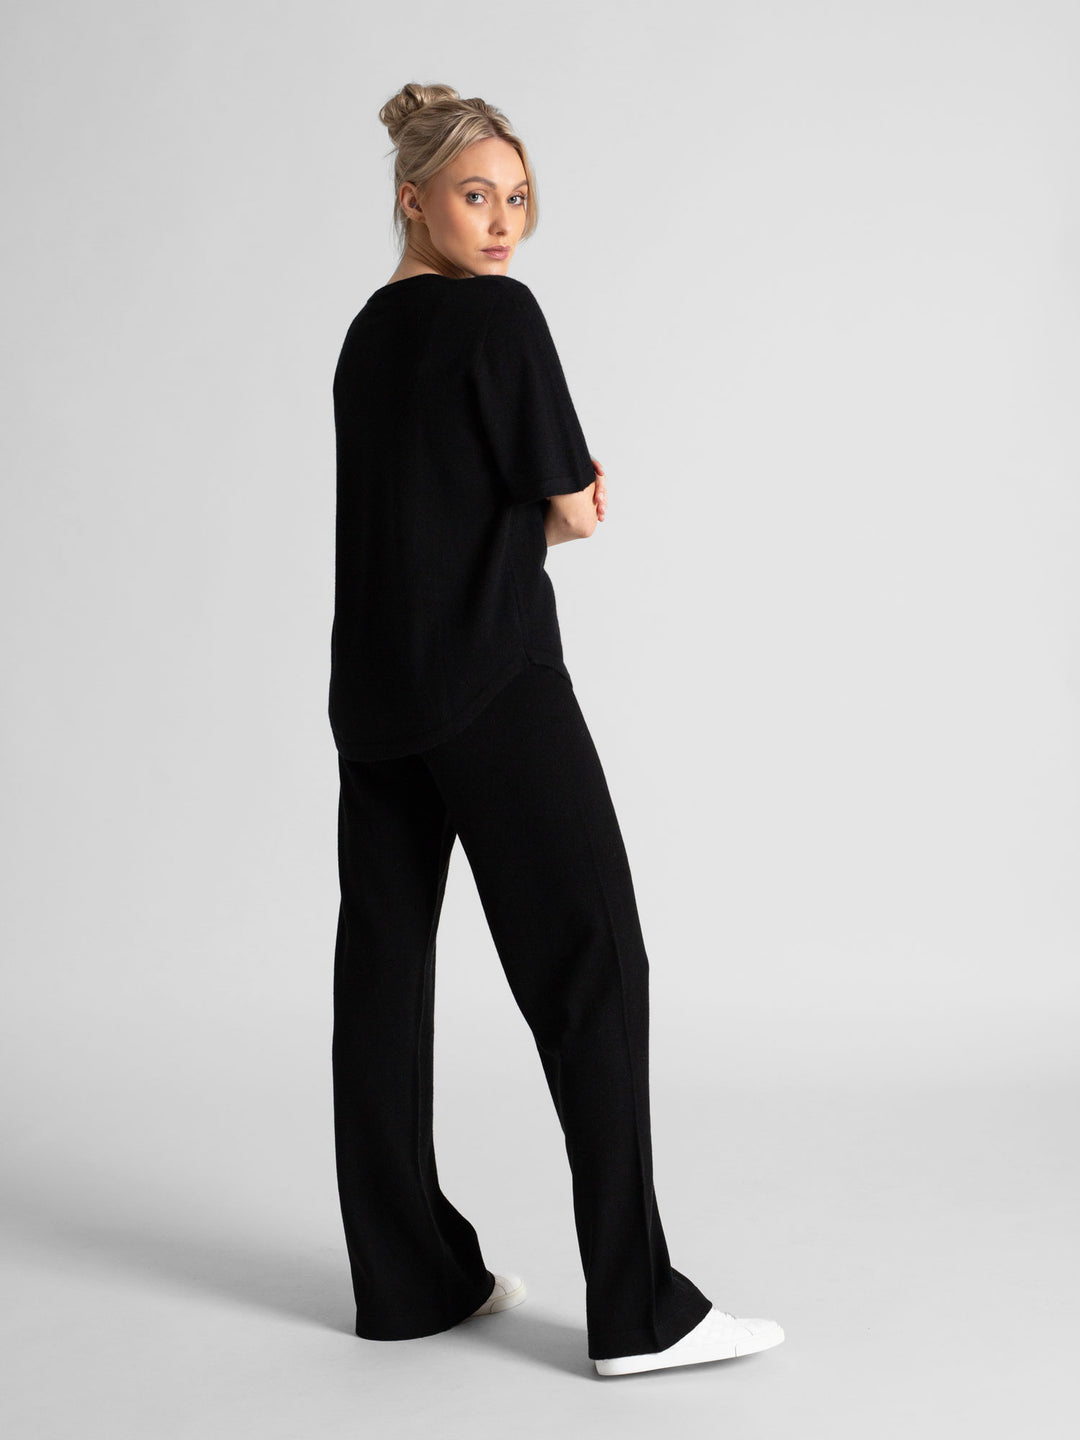 Cashmere t-shirt "Airy" in 100% pure cashmere. Color: Black. Scandinavian design by Kashmina.